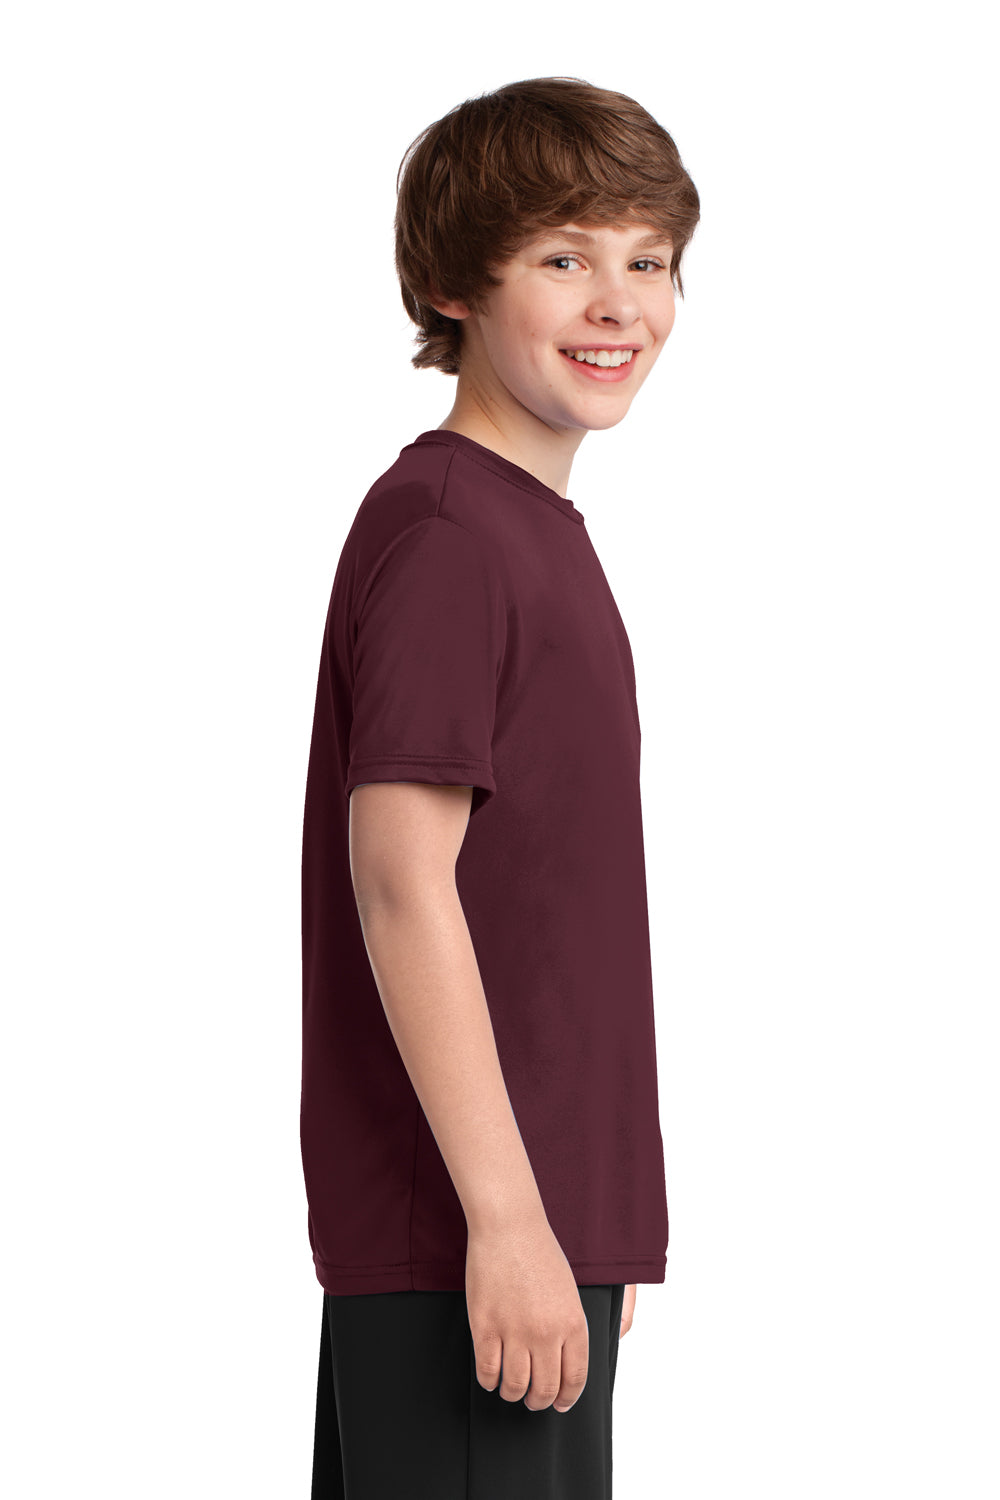 Port & Company PC380Y Youth Dry Zone Performance Moisture Wicking Short Sleeve Crewneck T-Shirt Maroon Side